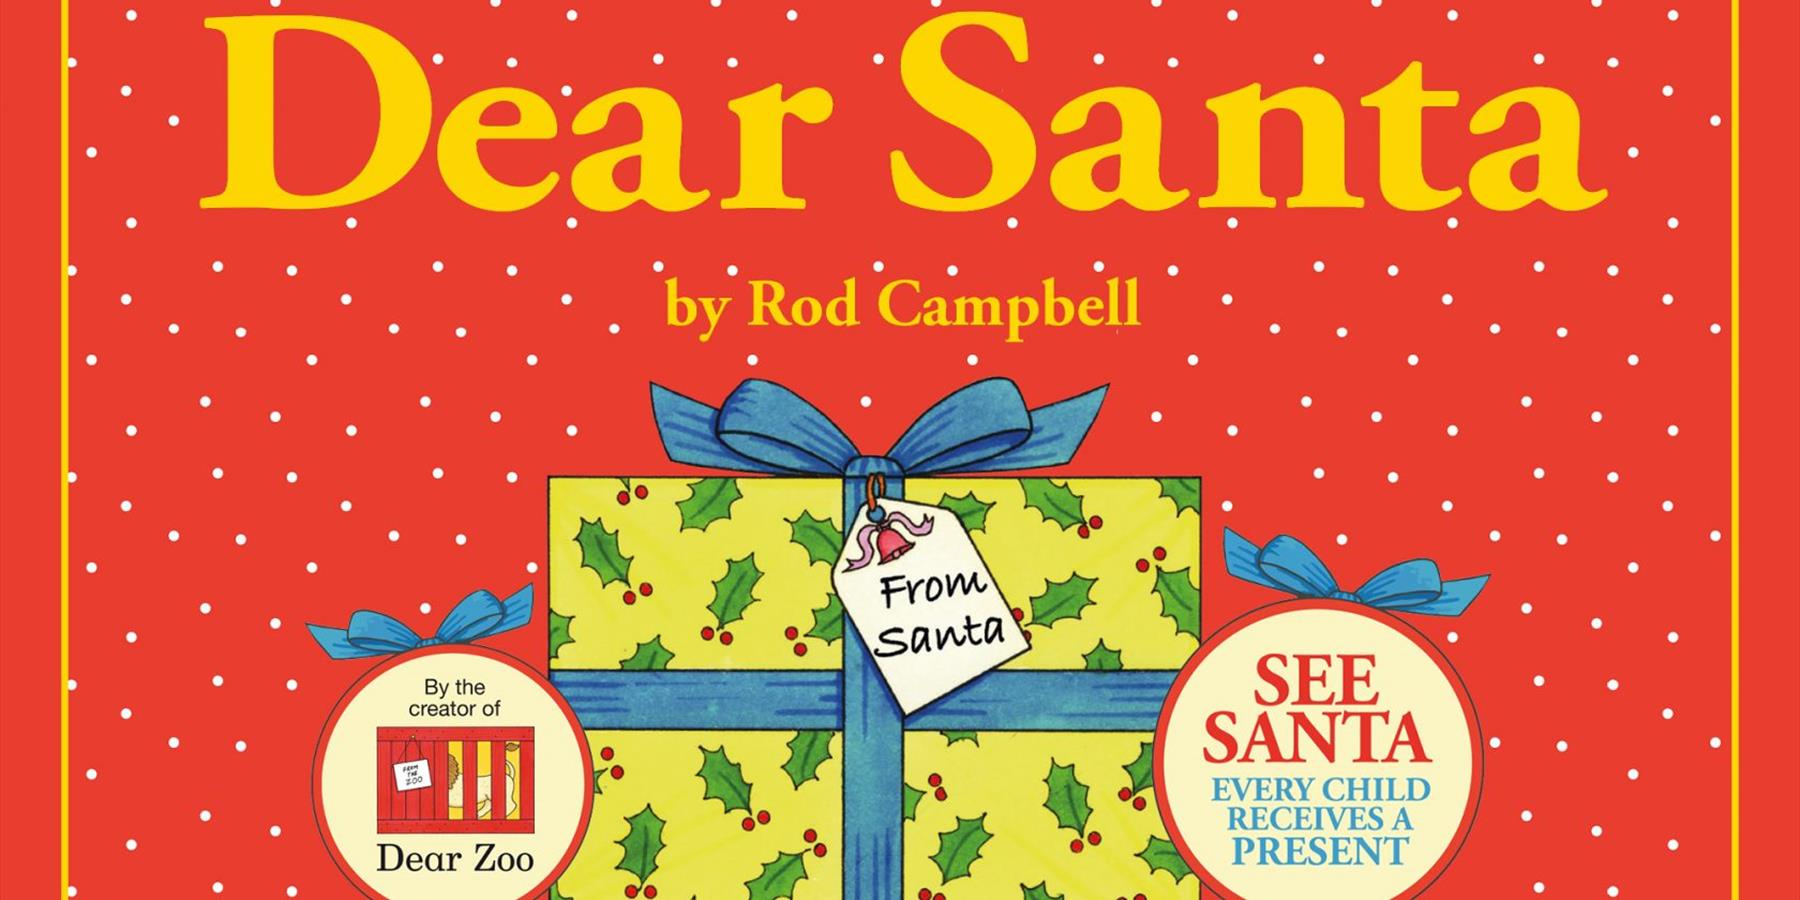 Dear Santa Live artwork. On a red background is a present wrapped in yellow paper with hollys on and a blue bow.